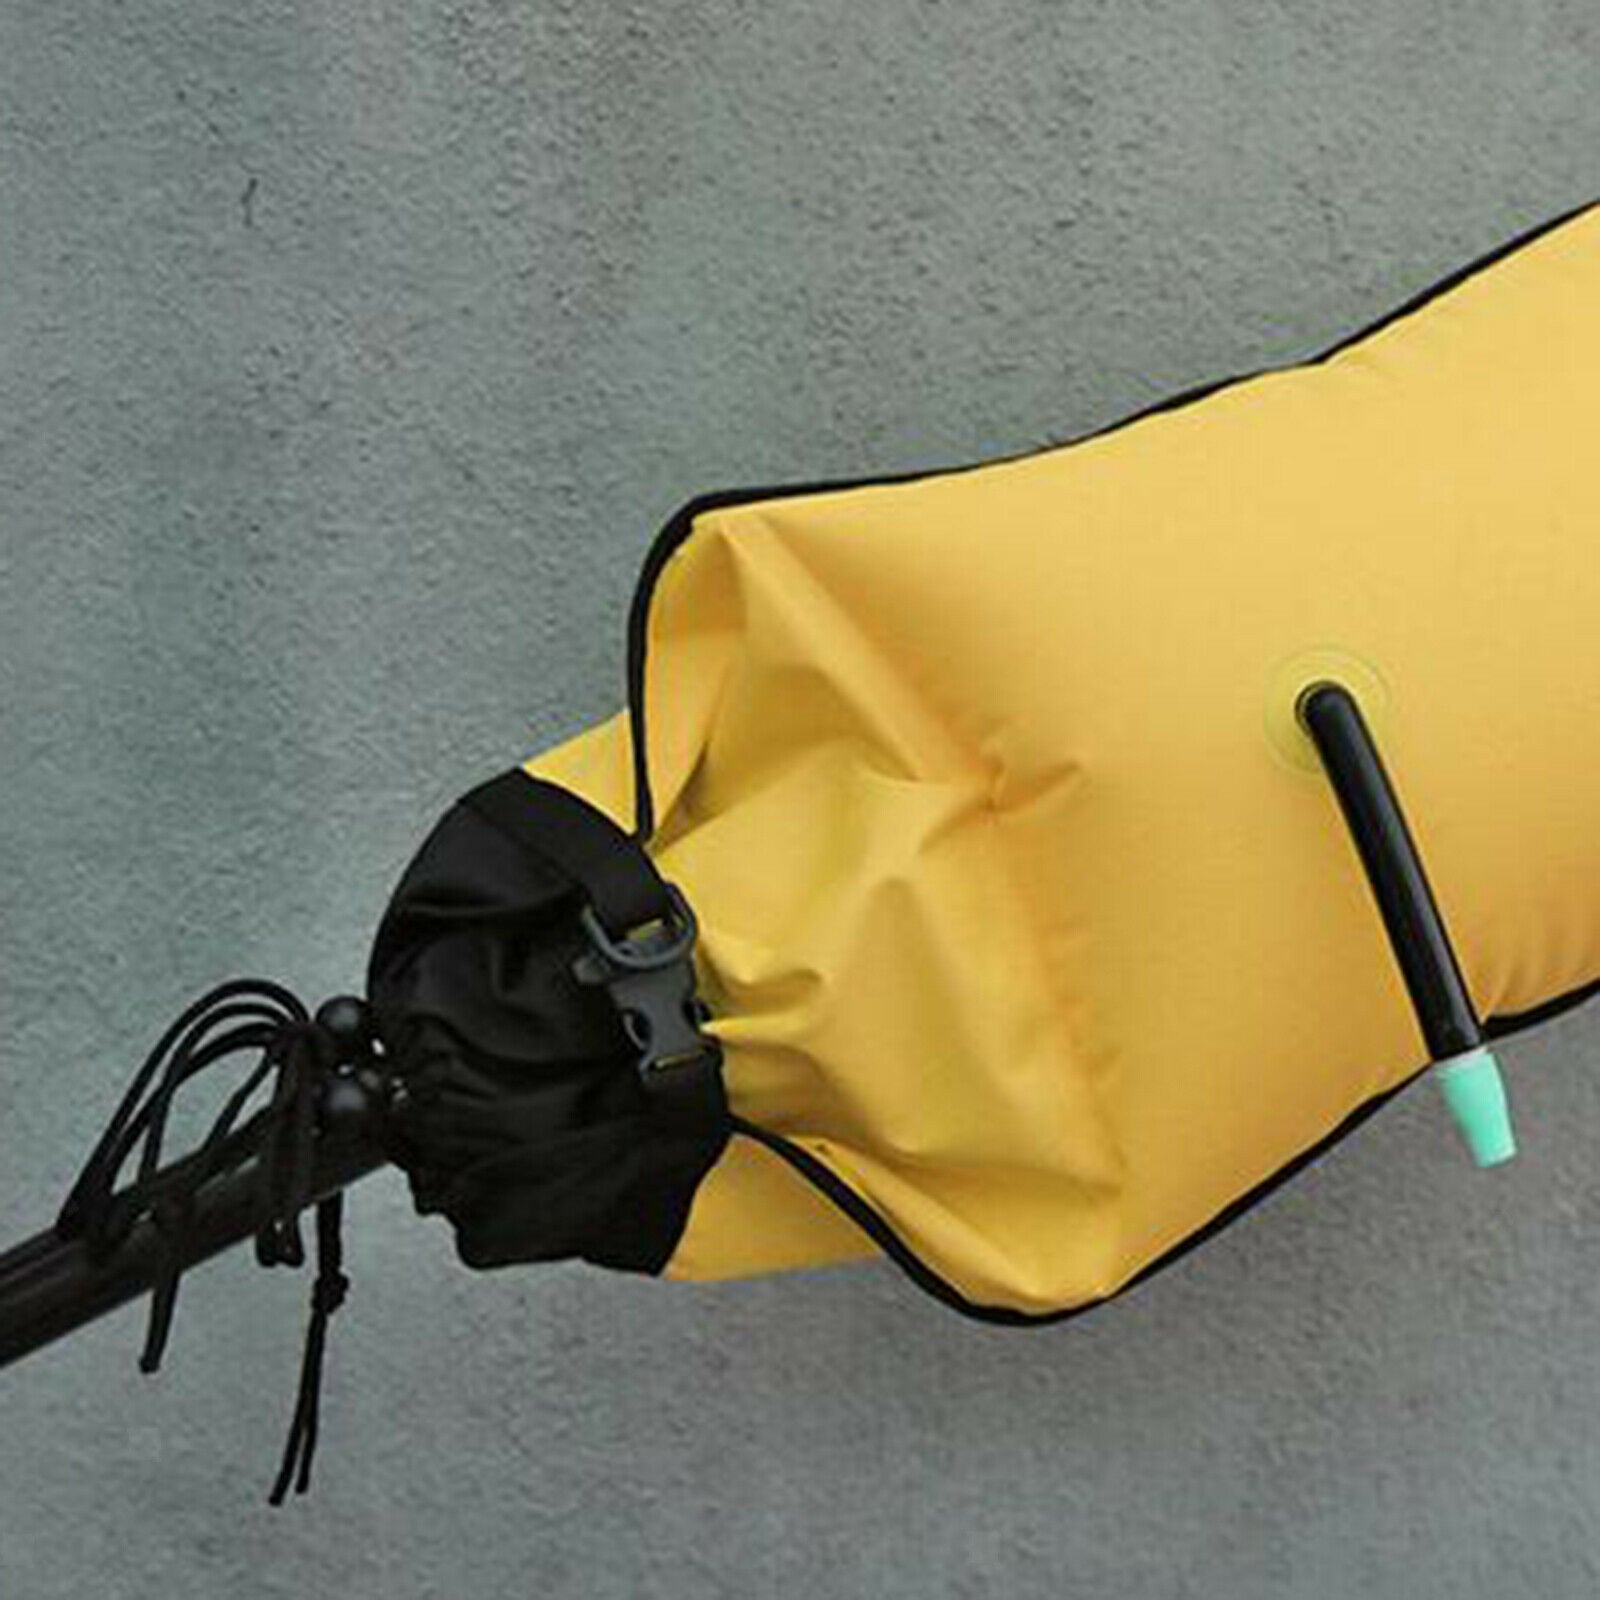 Canoe Kayak Paddle Float Dual Chamber Security Bag with Quick Release